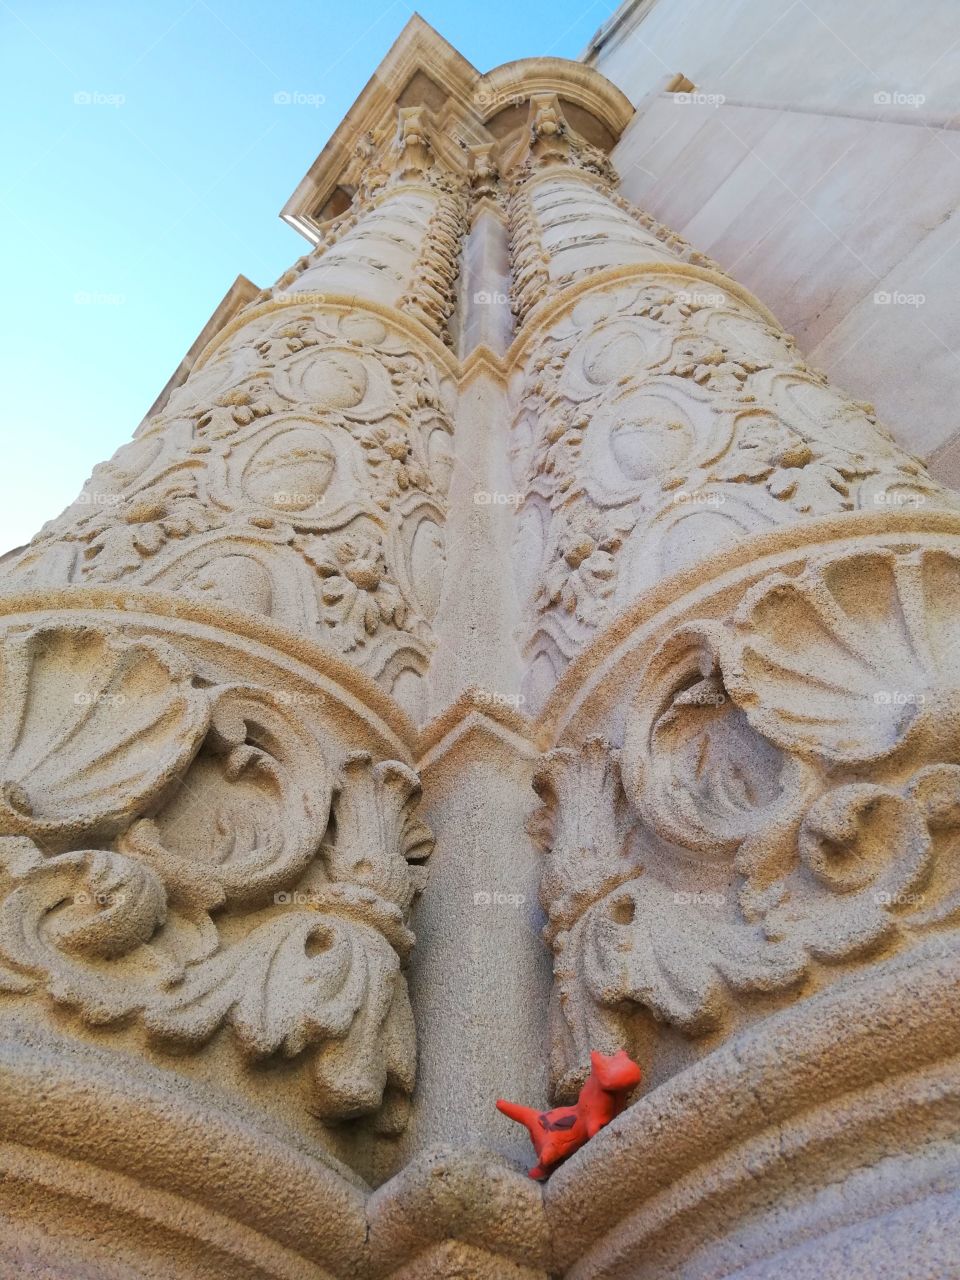 Enjoy this beautiful pillar, extremely detailed, you may catch the little art piece someone left resting on it.